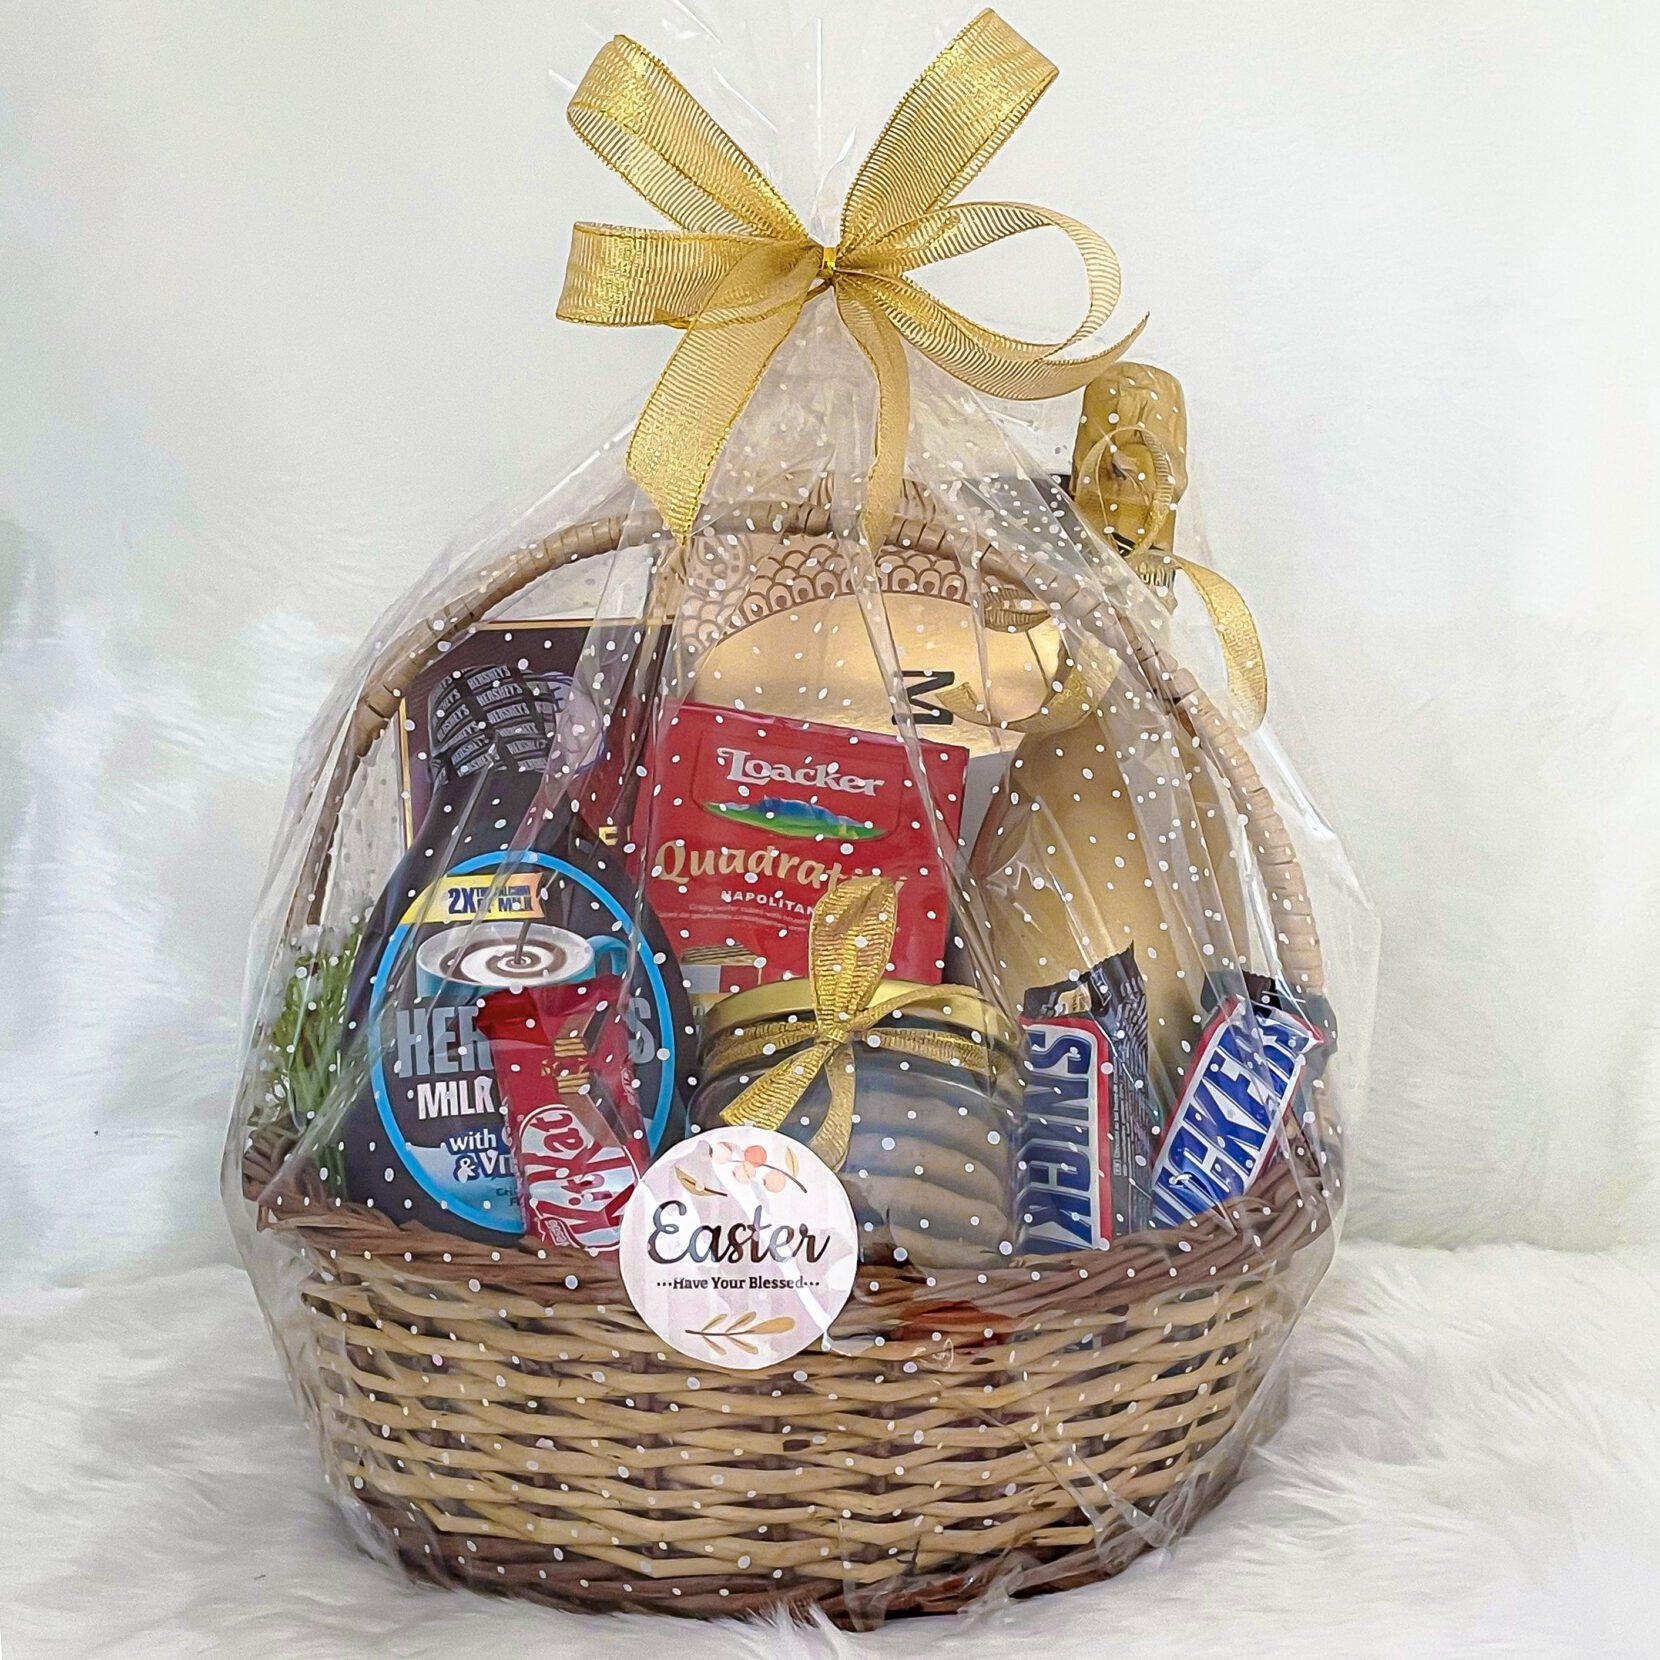 The featured Easter gift basket consists of Giacobazzi Non-Alcoholic Red Wine, Ferrero Rocher Moments Truffles, Kinder Bueno White Chocolate Bar With Coconut, Loacker Quadratini Napolitaner Waffles, Hershey's Milk Booster, chocolate cookies, KitKat, Snickers, and Gone Mad Choco Sticks.